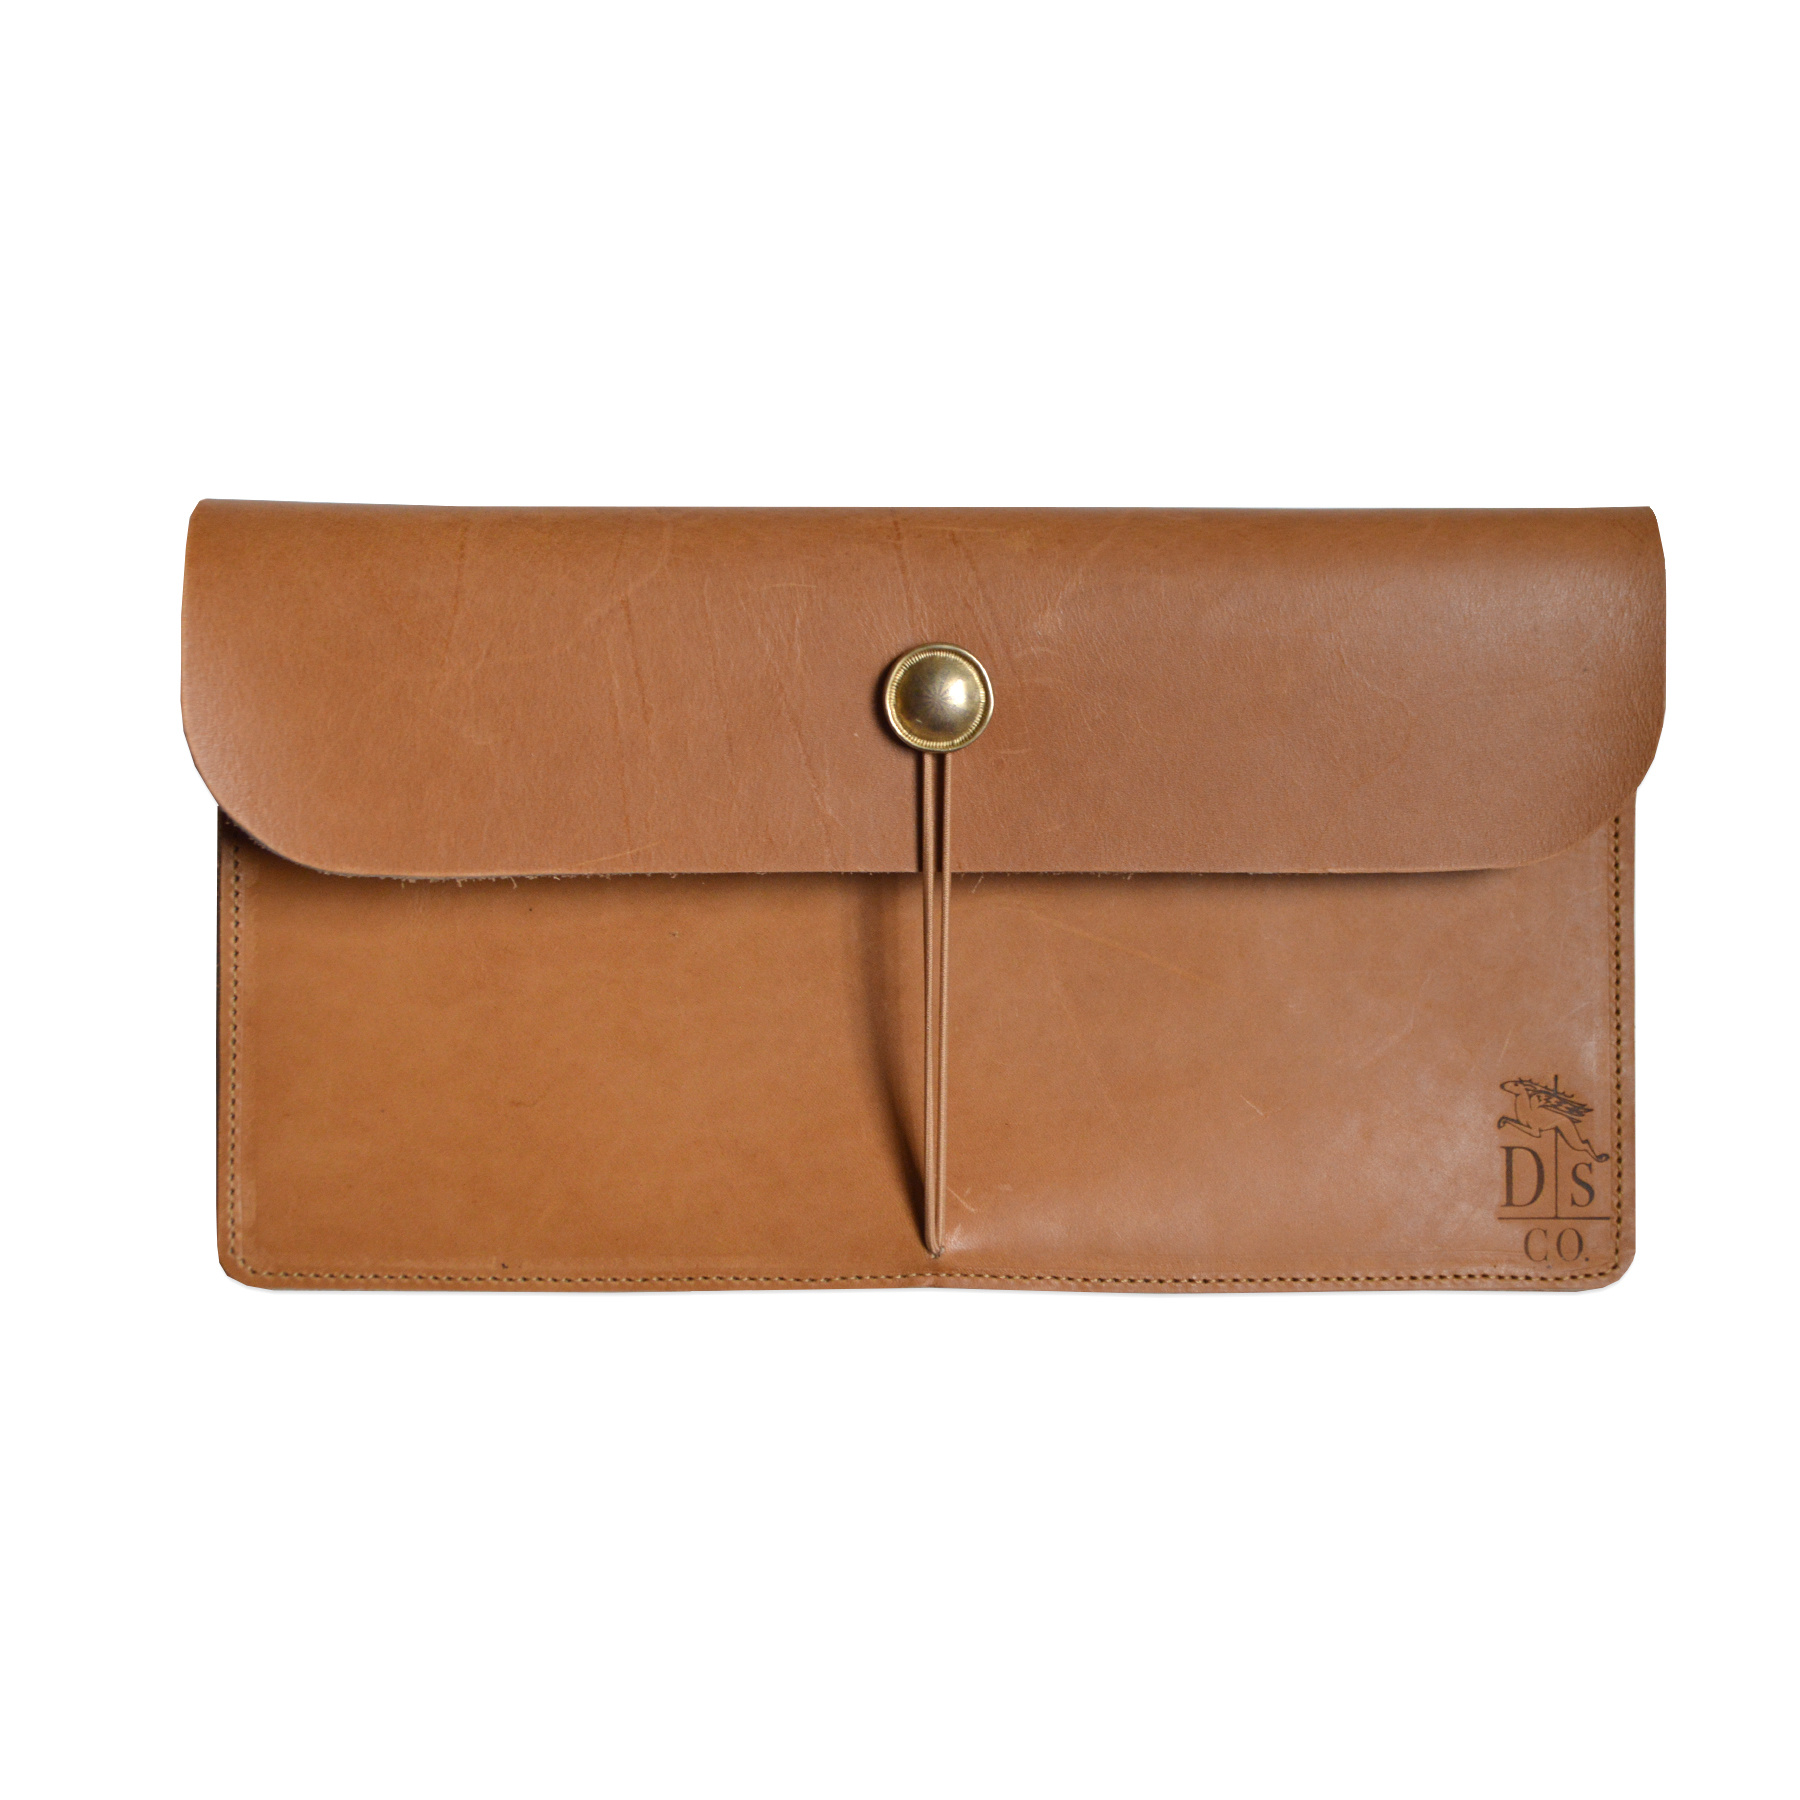 Ladies Pure Leather Clutch Purse at Best Price, Ladies Pure Leather Clutch  Purse Manufacturer in New Delhi